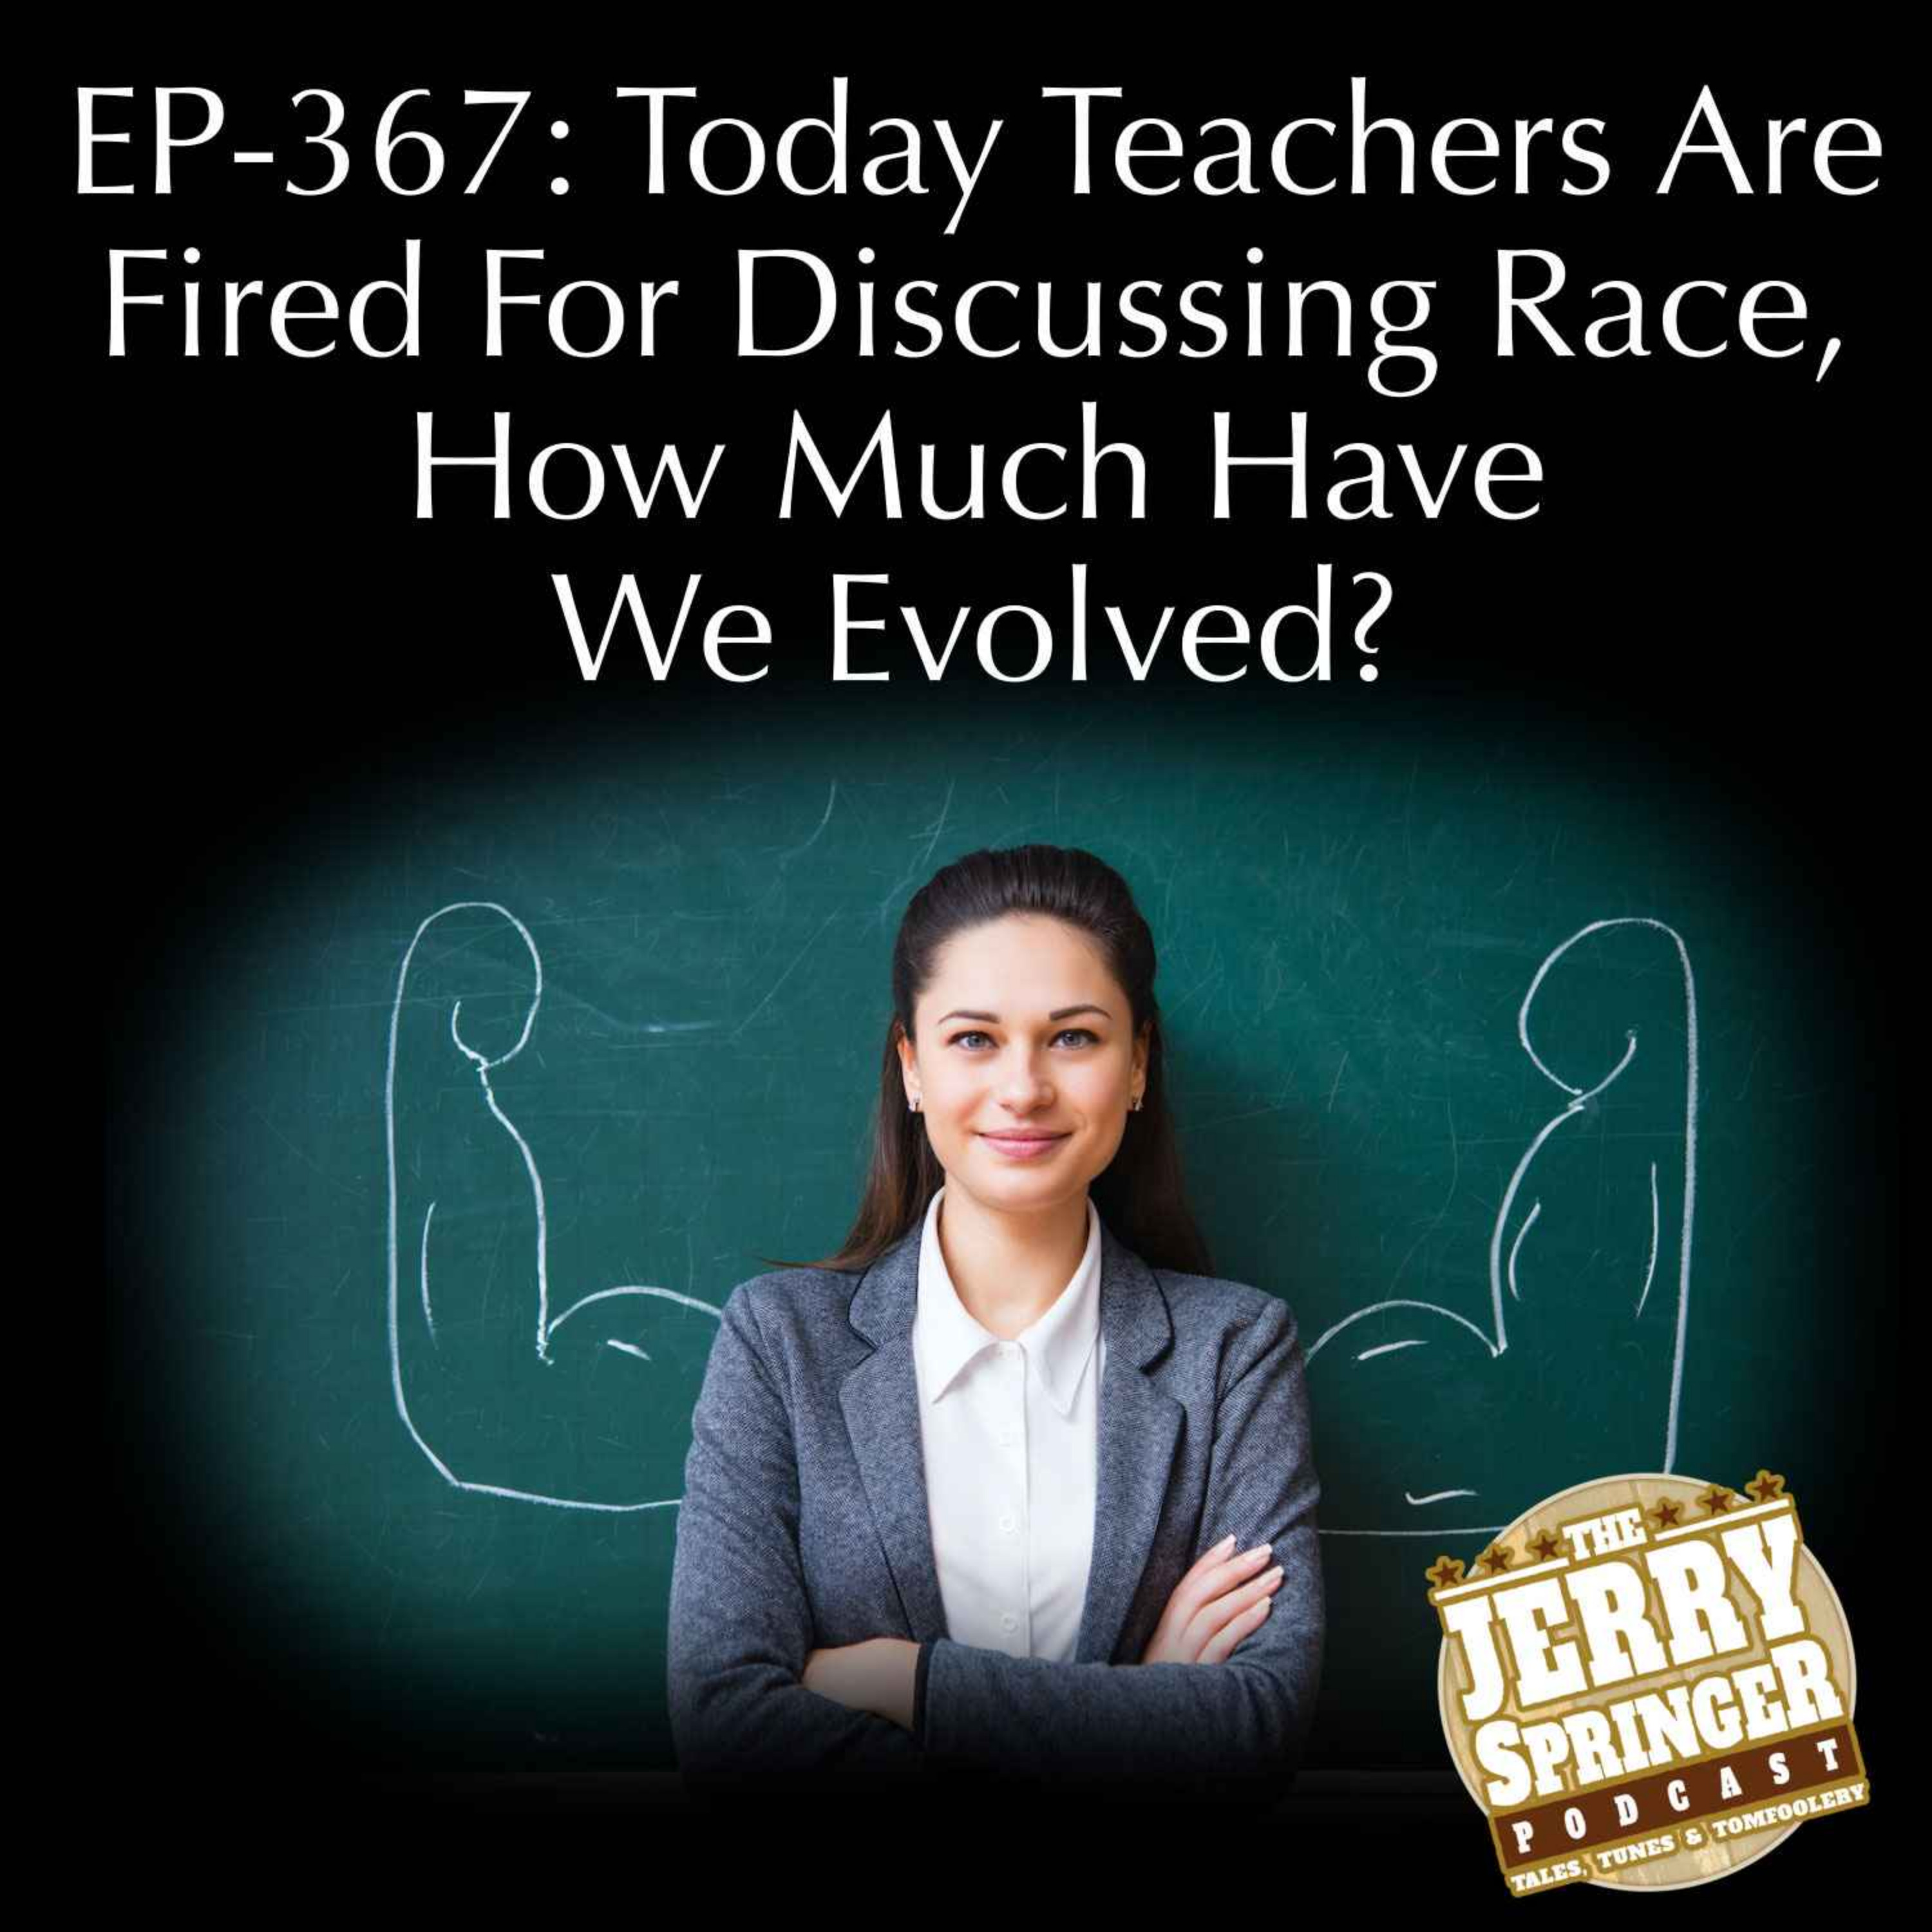 Today Teachers Are Fired For Discussing Race, How Much Have We Evolved? EP - 367